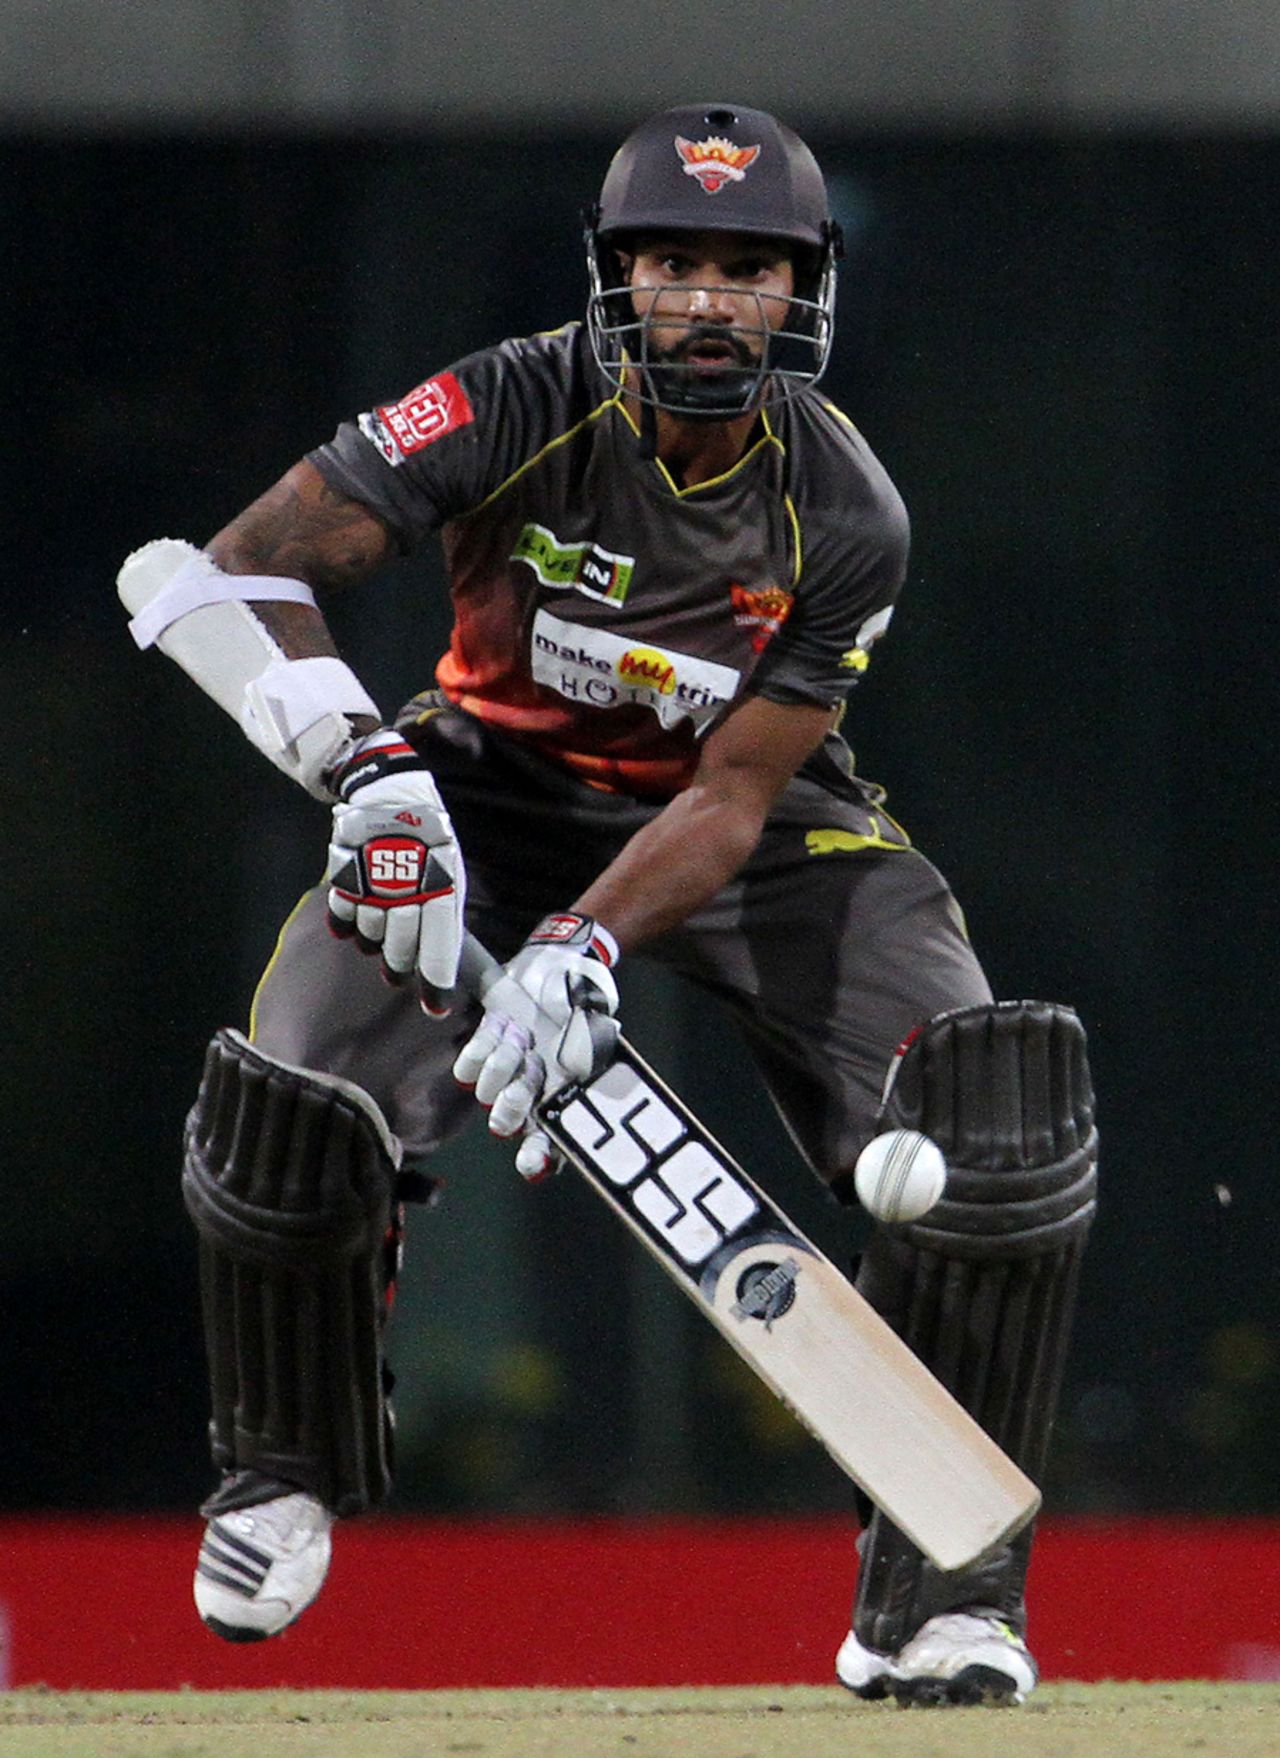 Shikhar Dhawan looks to scoop over the keeper, Chennai Super Kings v Sunrisers Hyderabad, Group B, Champions League 2013, Ranchi, September 26, 2013